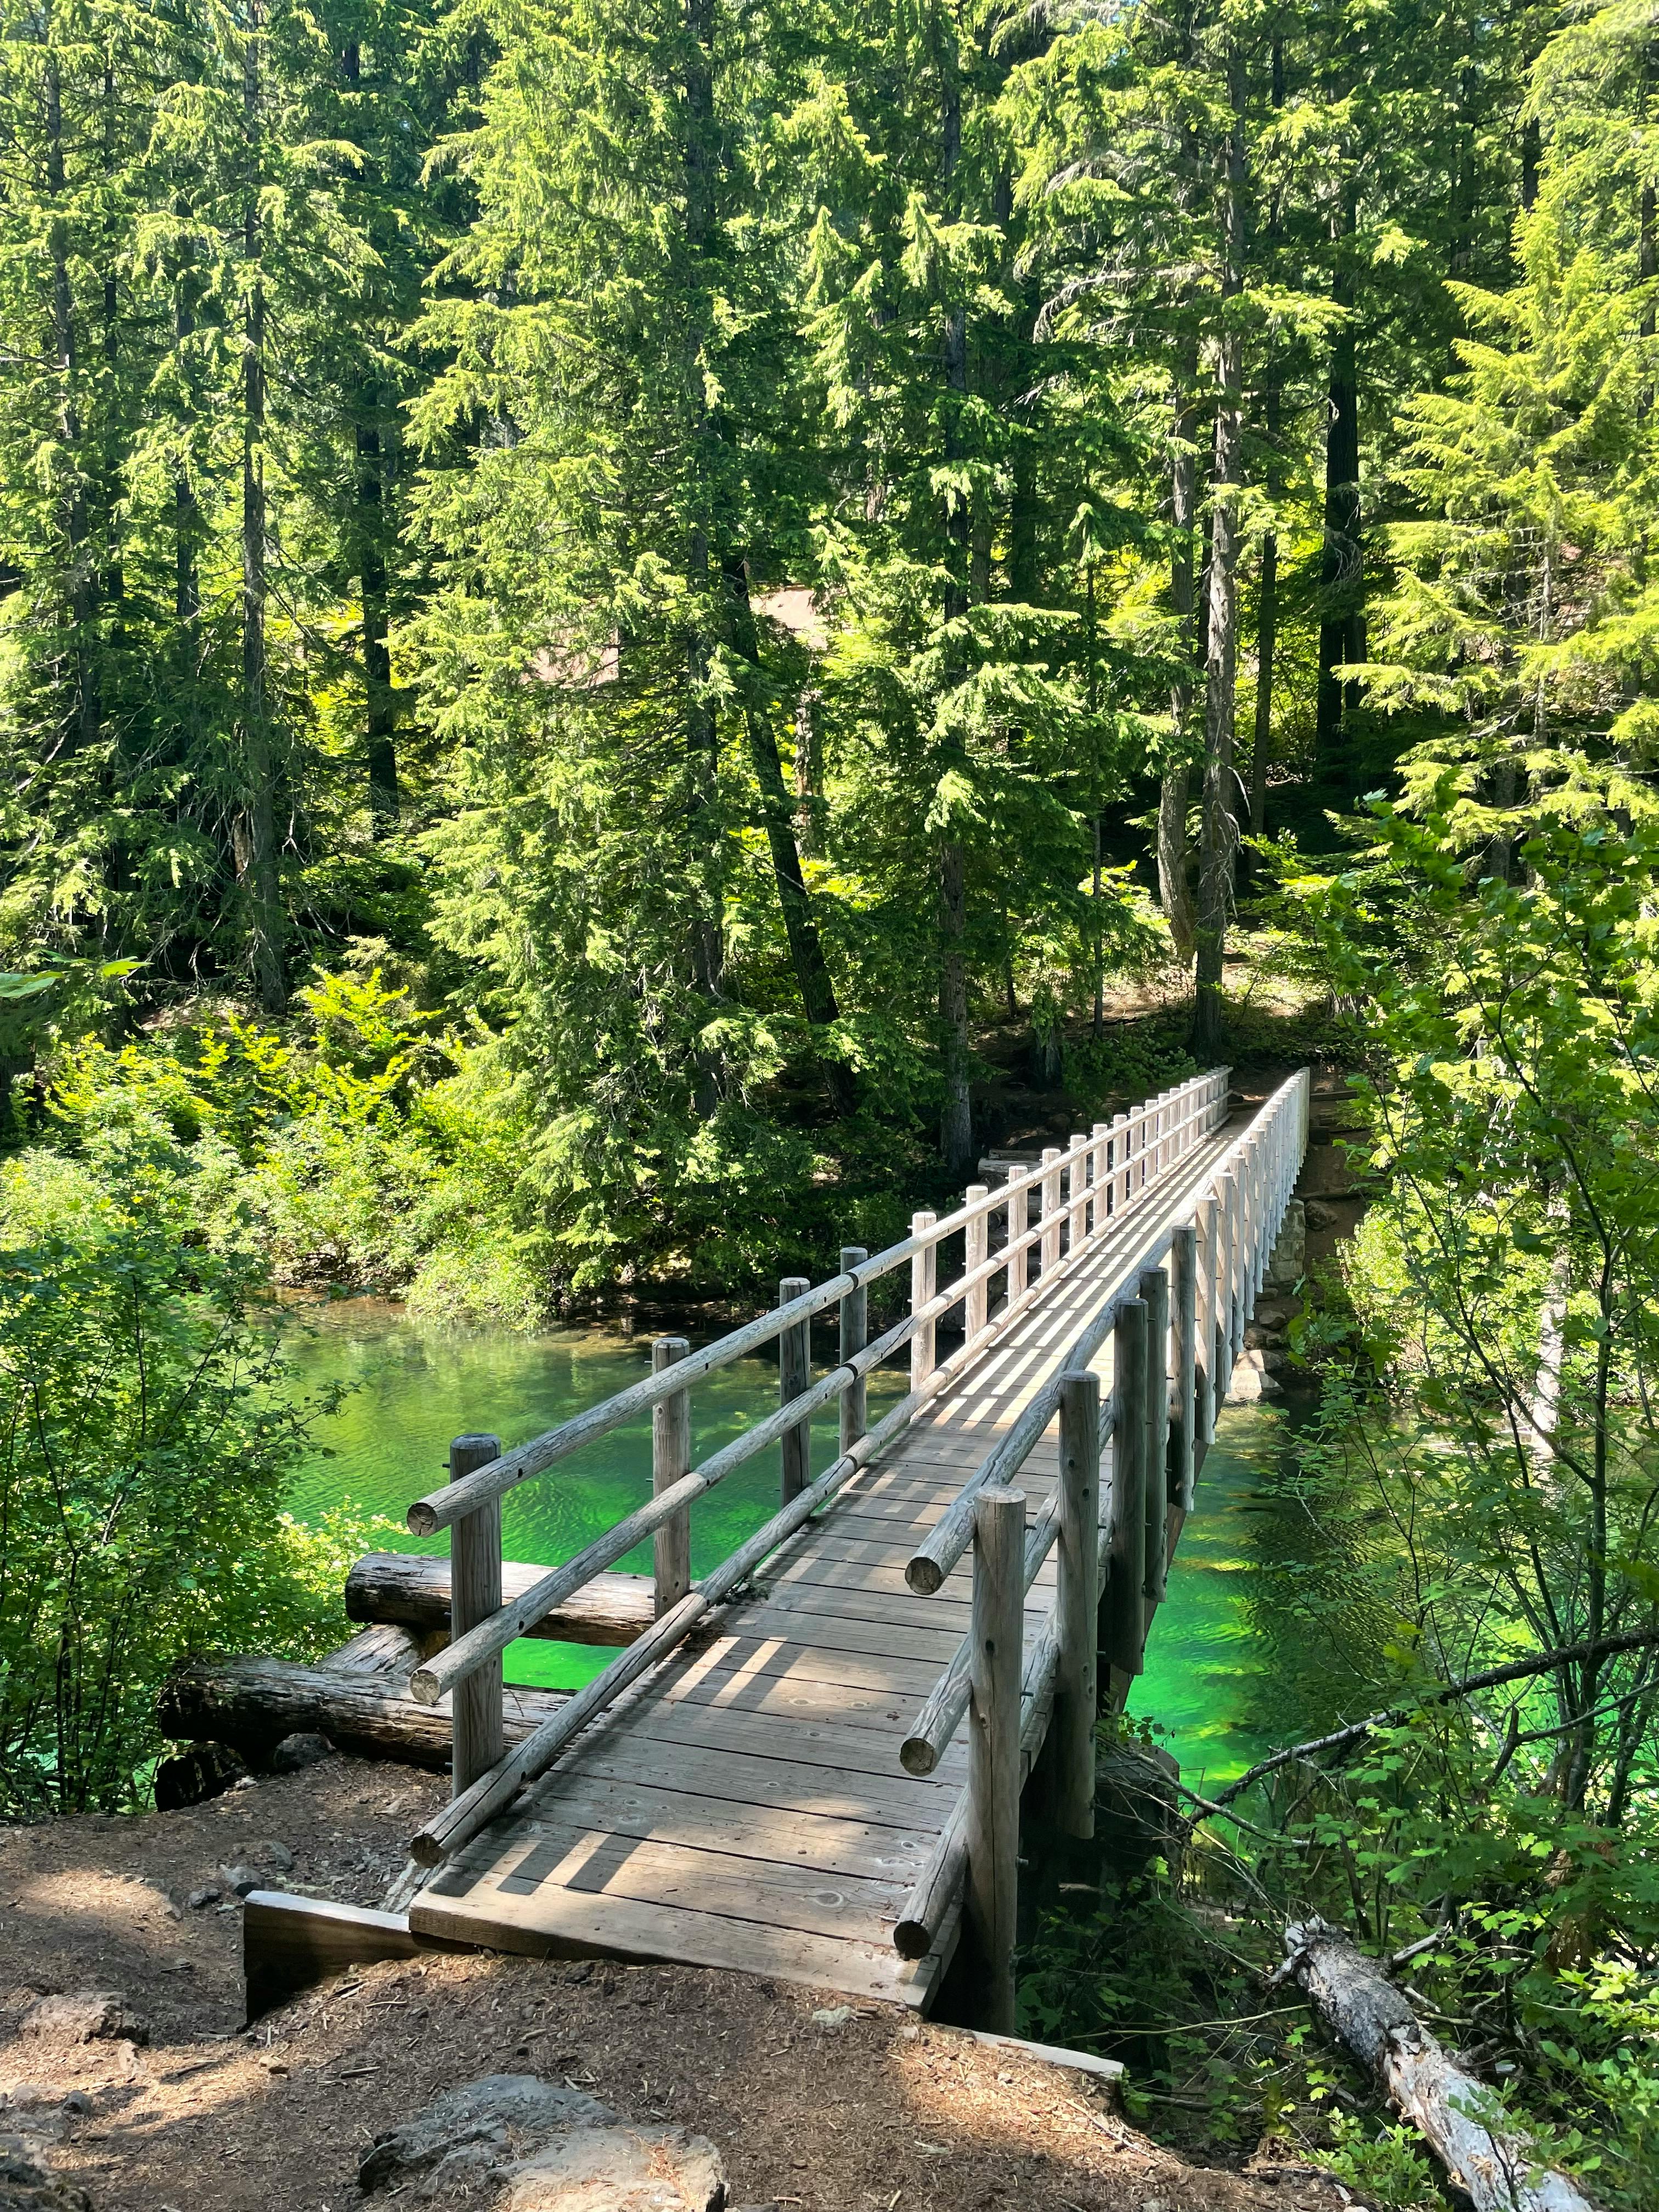 A wooden bridge goes over shockingly green and clear water with pine trees all around.